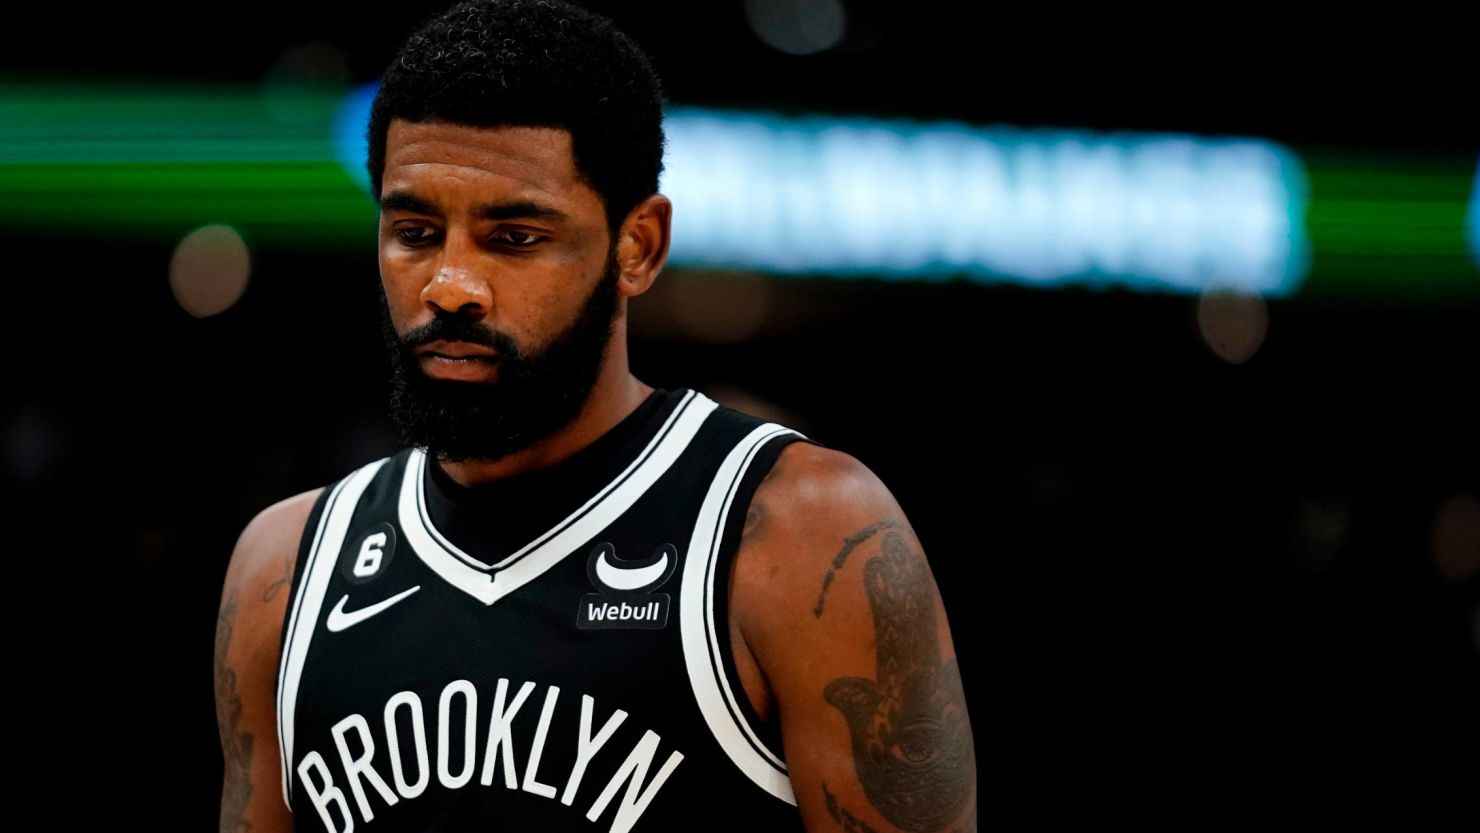 Kyrie Irving apologizes amid suspension by Brooklyn Nets over